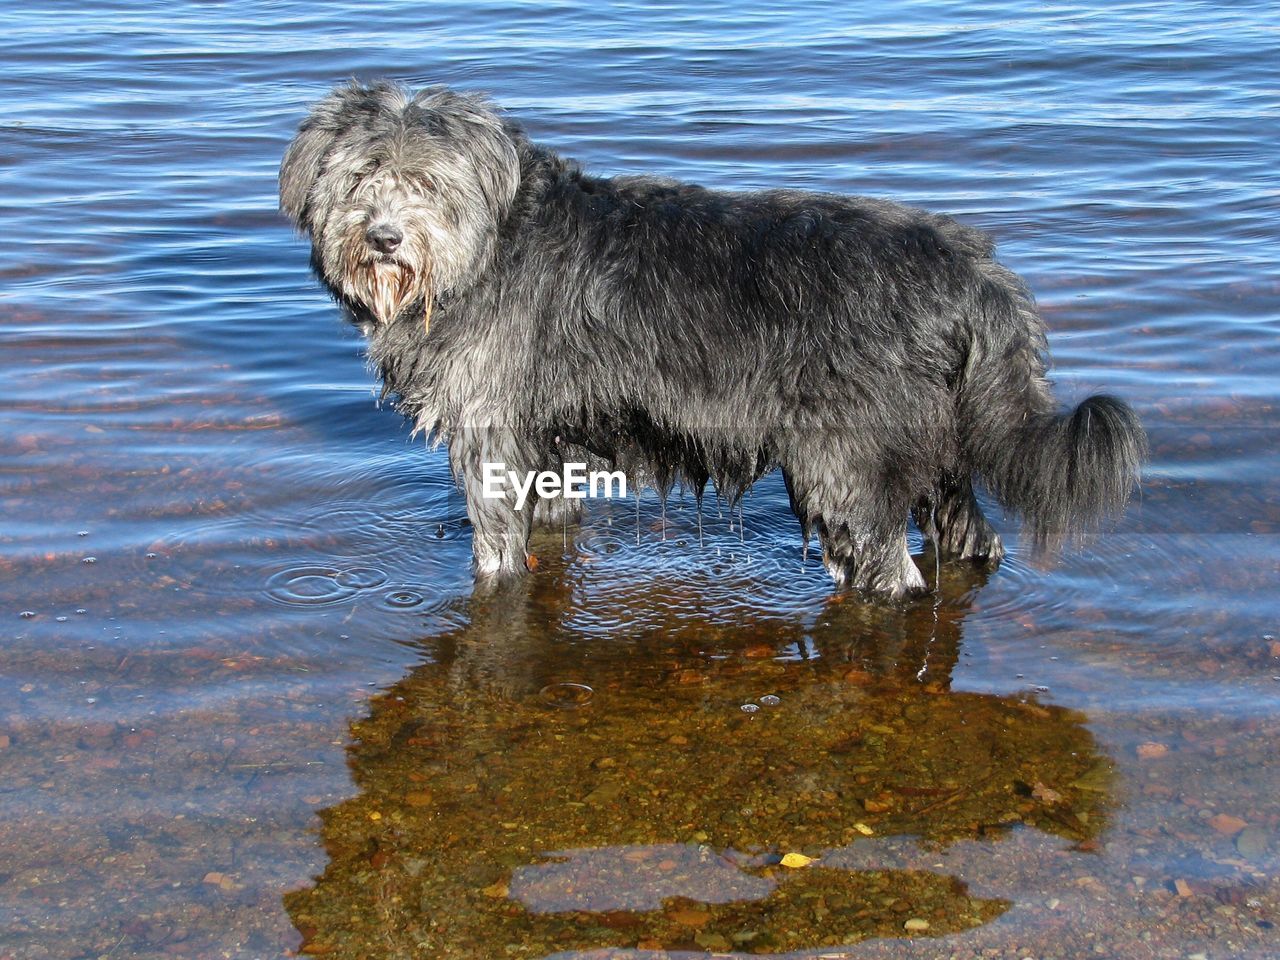 Wet dog standing in lake